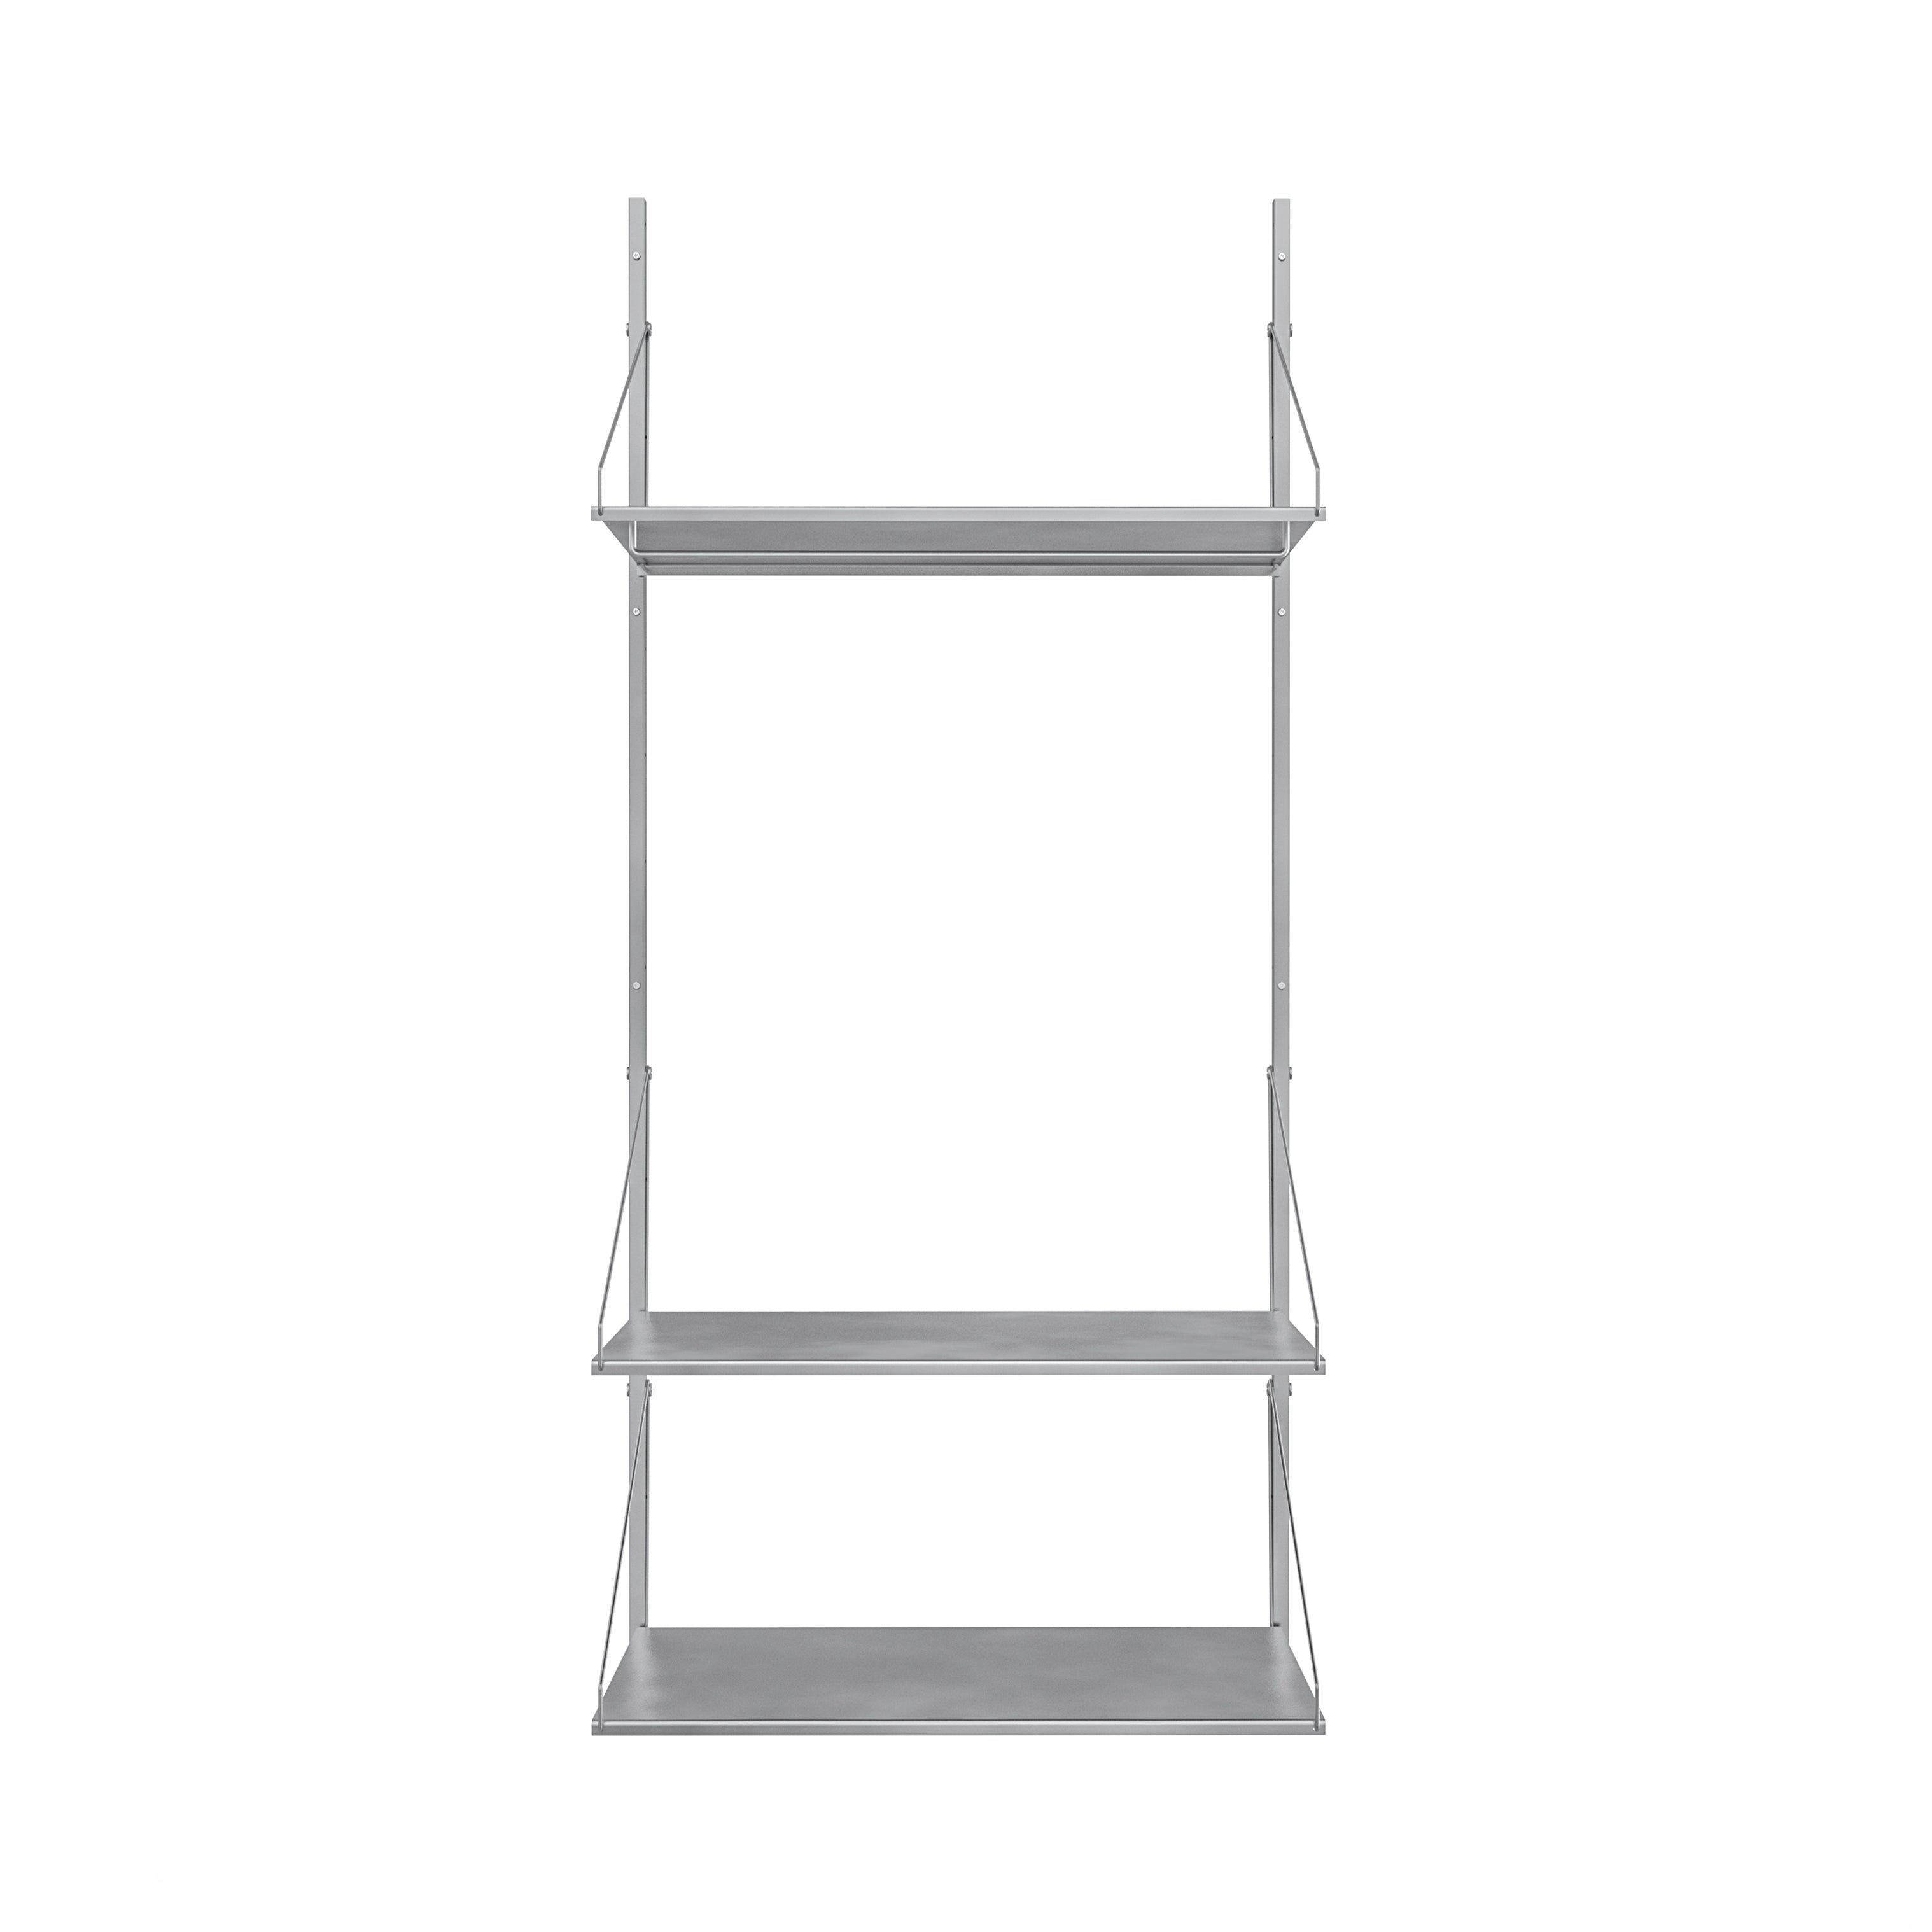 Shelf Library: Steel + High (W80) + Hanger Section + Stainless Steel